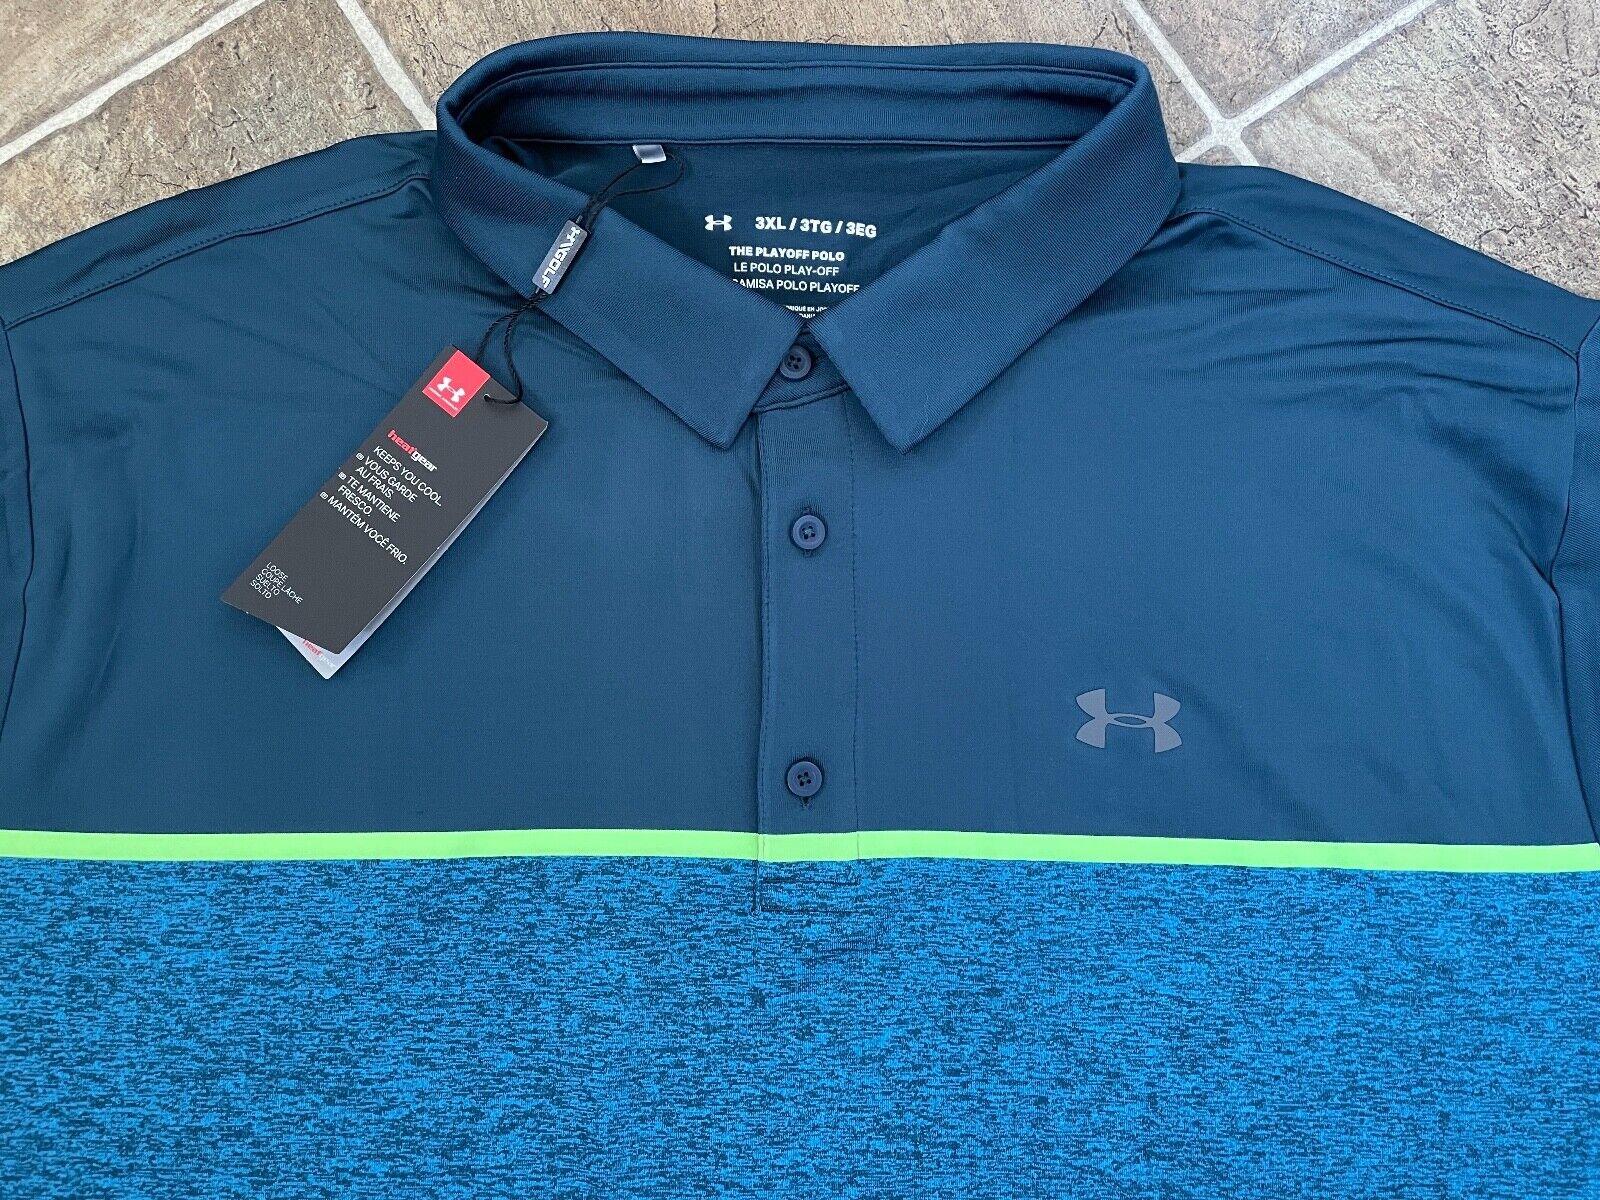 New Under Armour Men\'s Heather Gray Golf Polo Shirt Size 3XL Loose